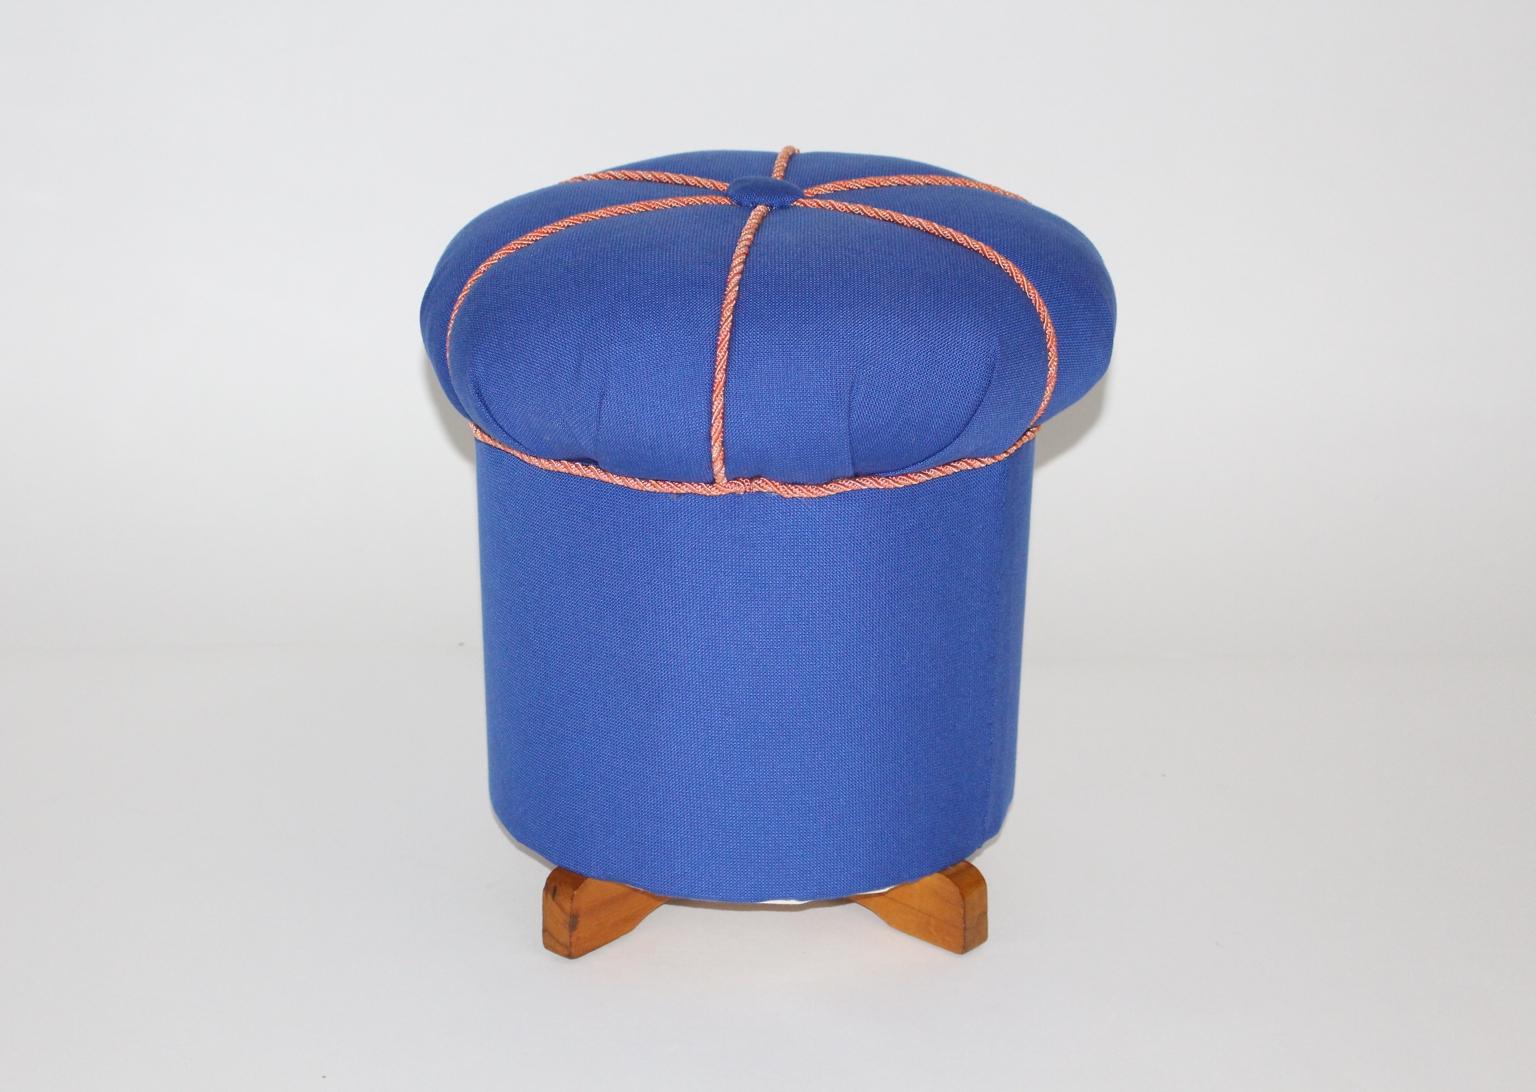 The presented vintage pouf features beech wood feet and was recently covered with electric blue textile fabric and pink cords.
The pouf was designed and made in Austria, circa 1930.
Also the vintage condition is very good.
Approximate